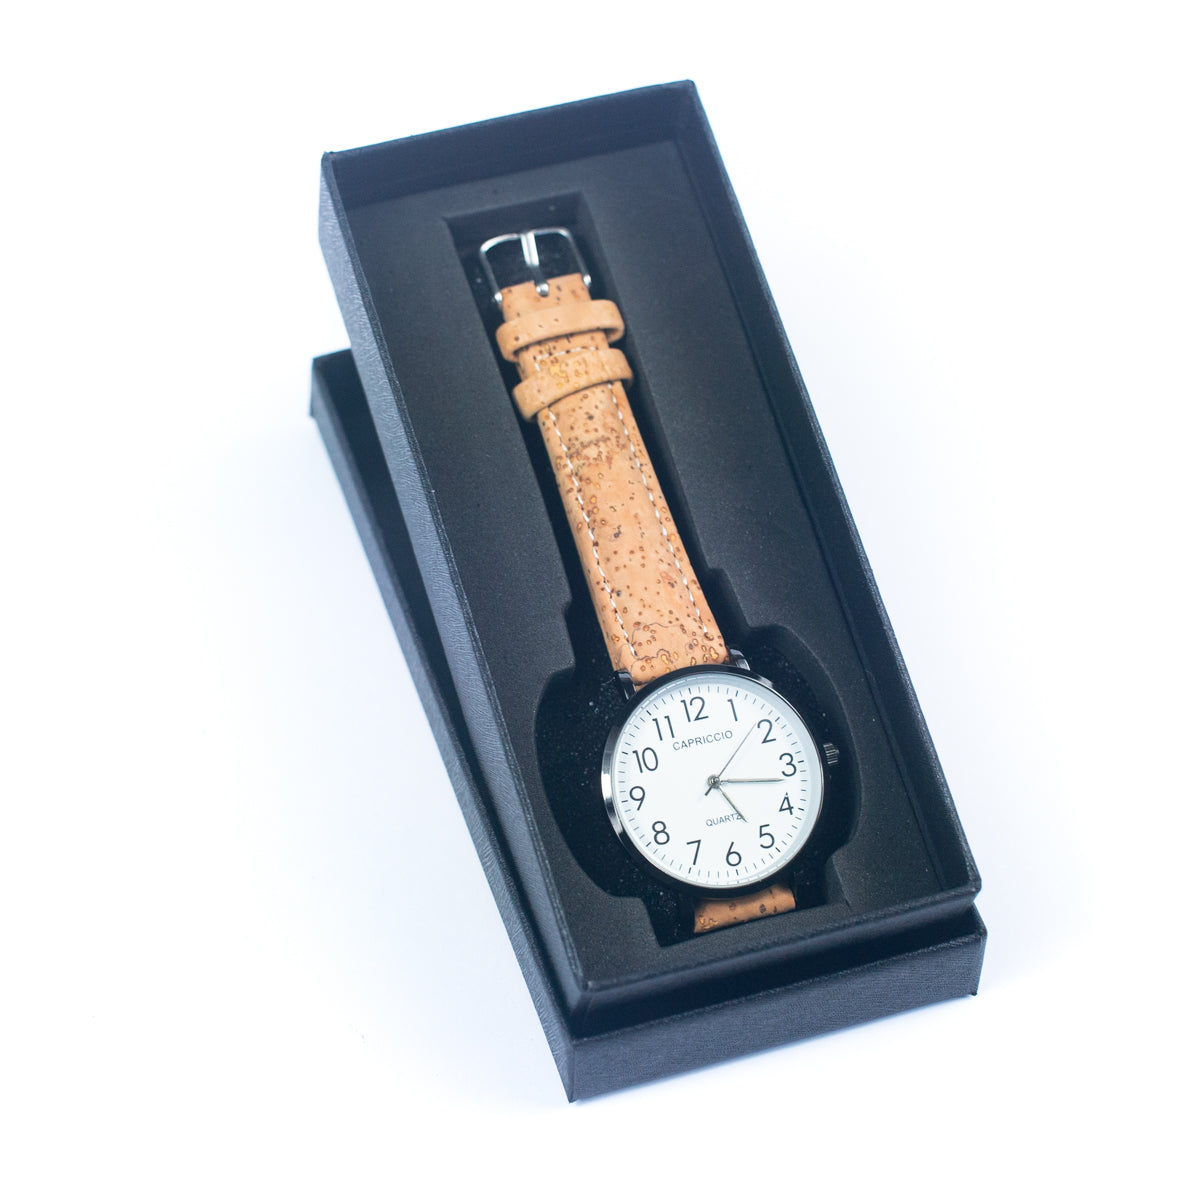 Women's Fashion Natural Cork Watch | THE CORK COLLECTION